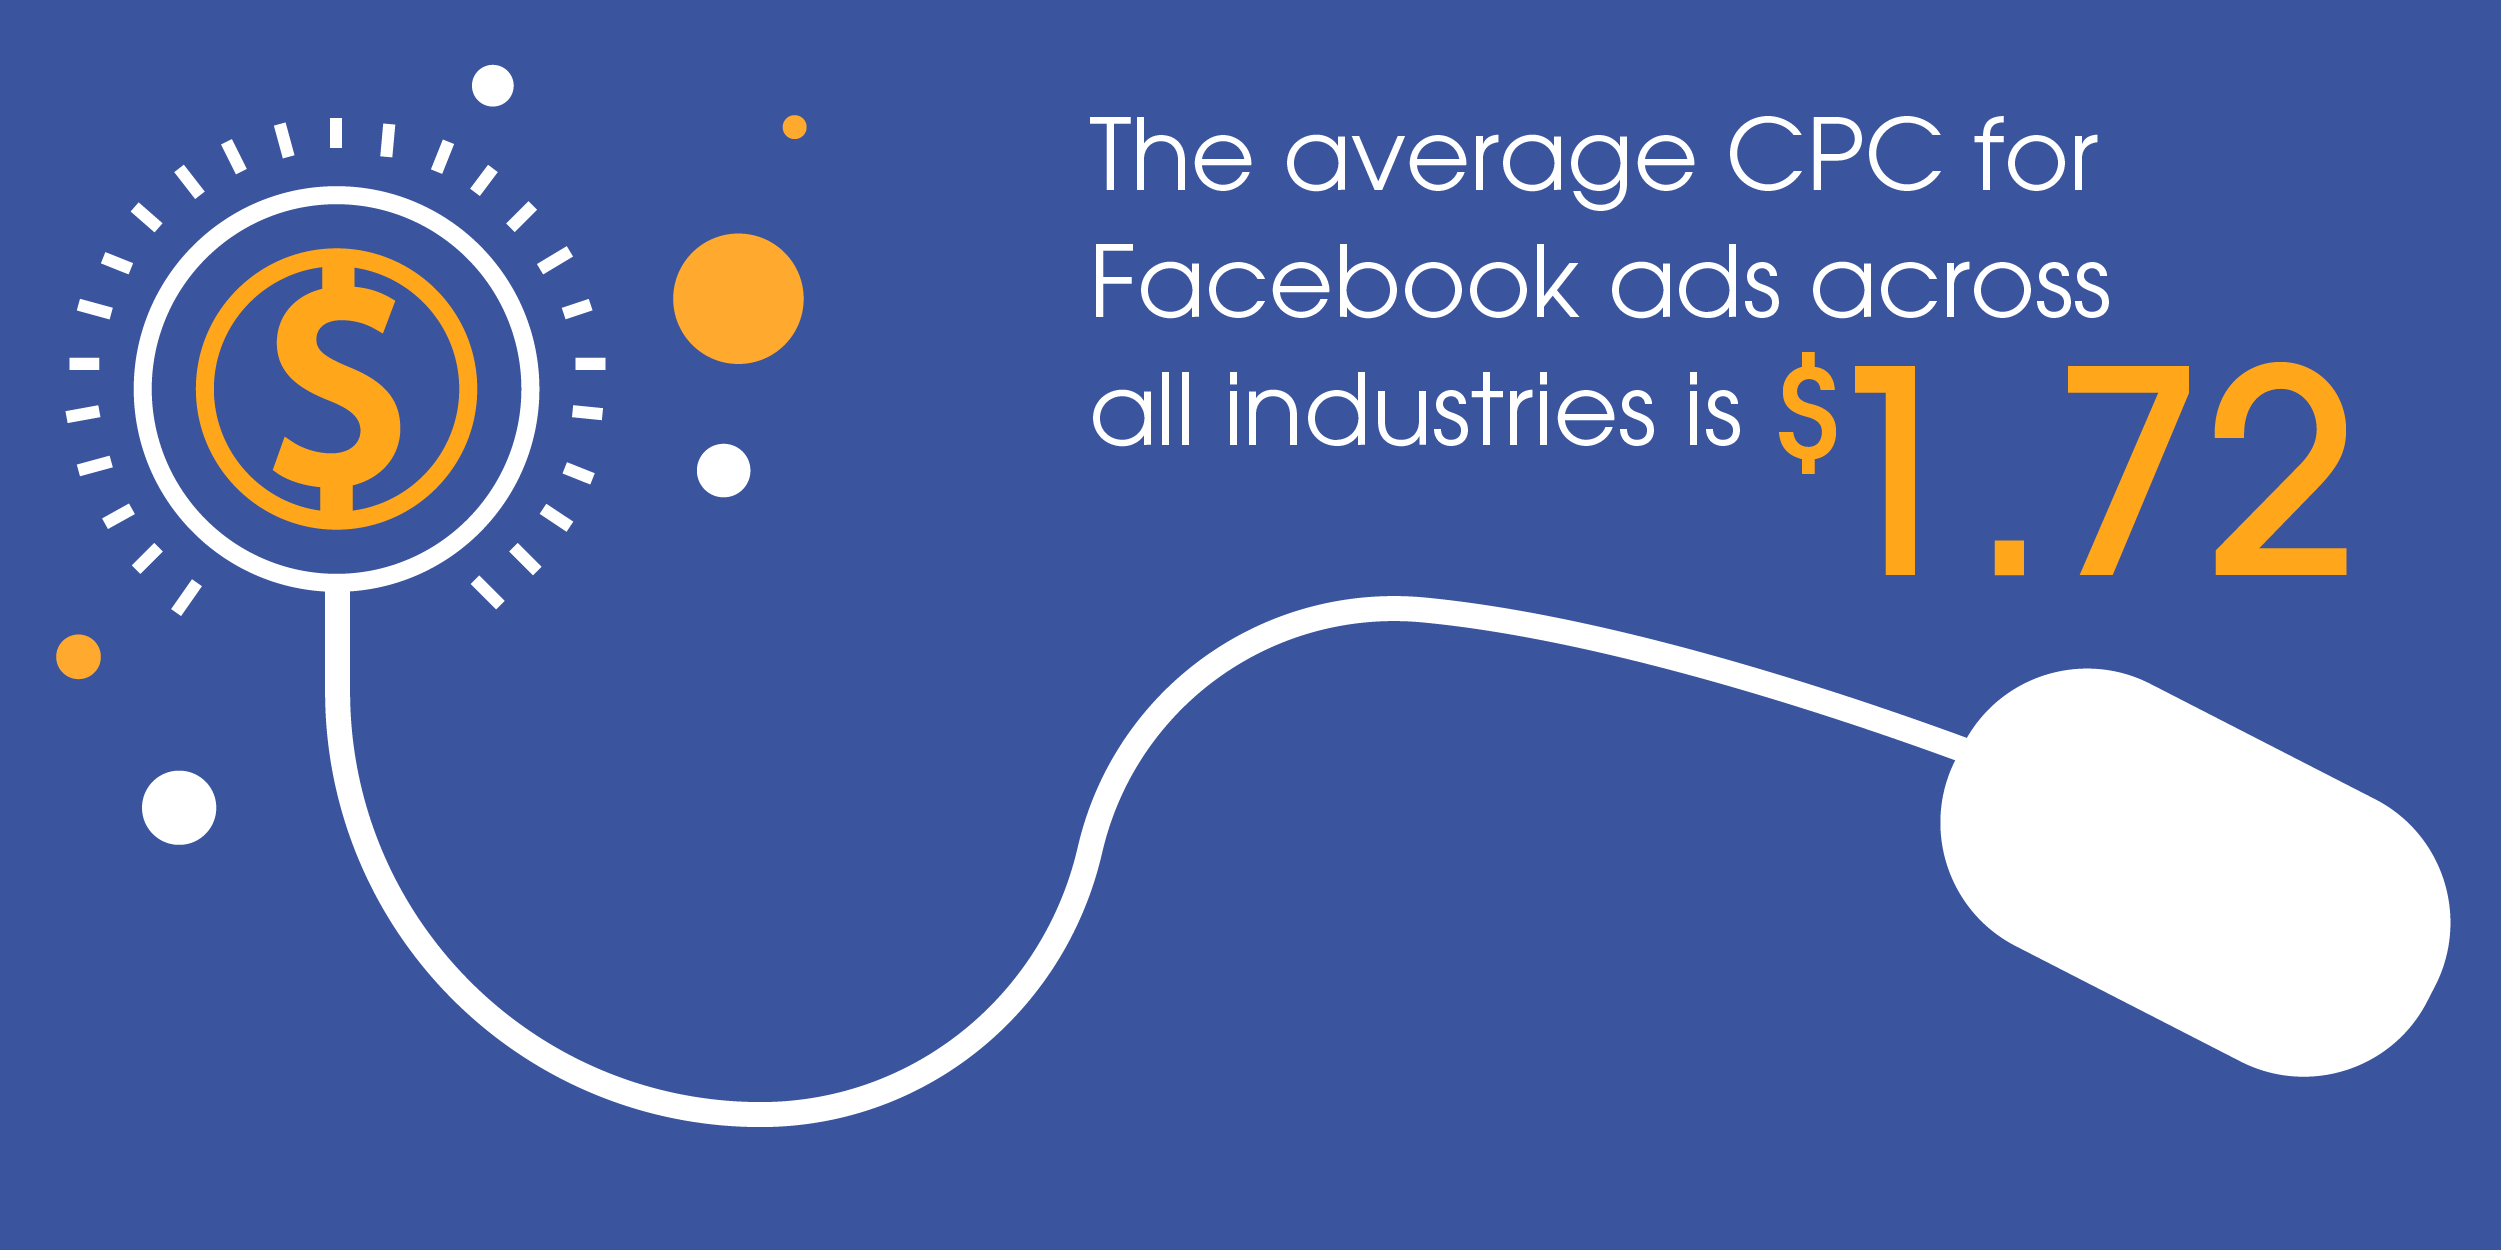 The average CPC for Facebook ads across all industries is $1.72